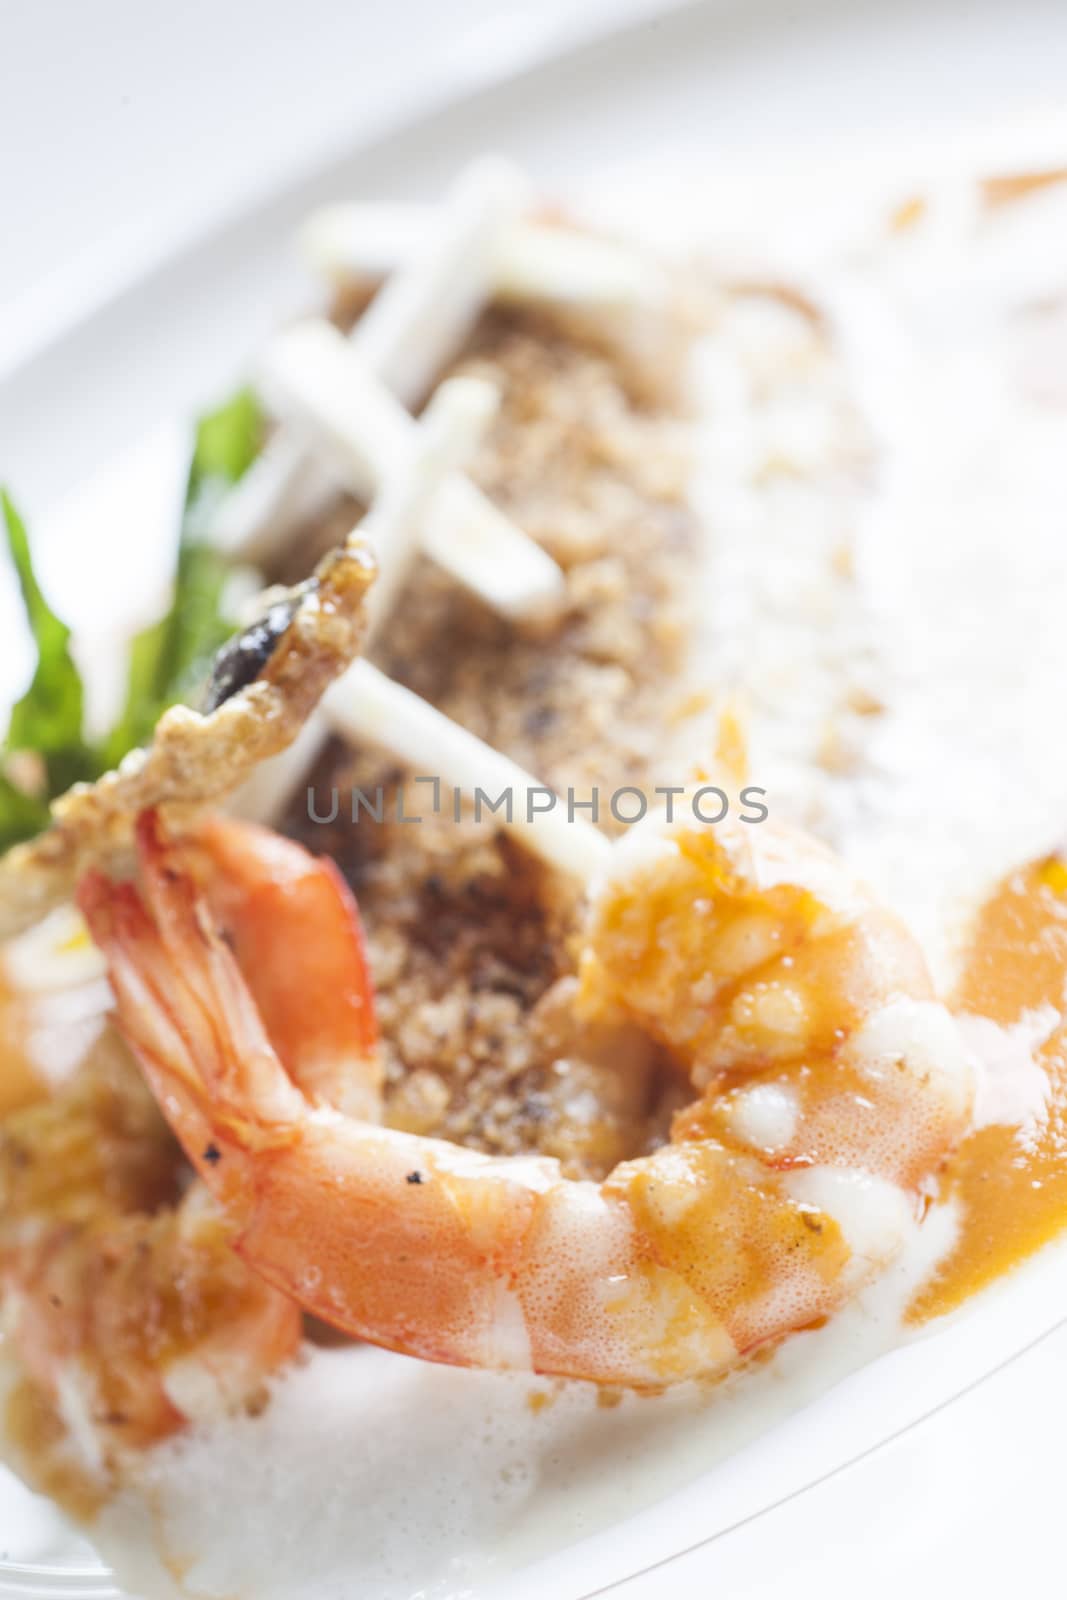 Shrimps with fish